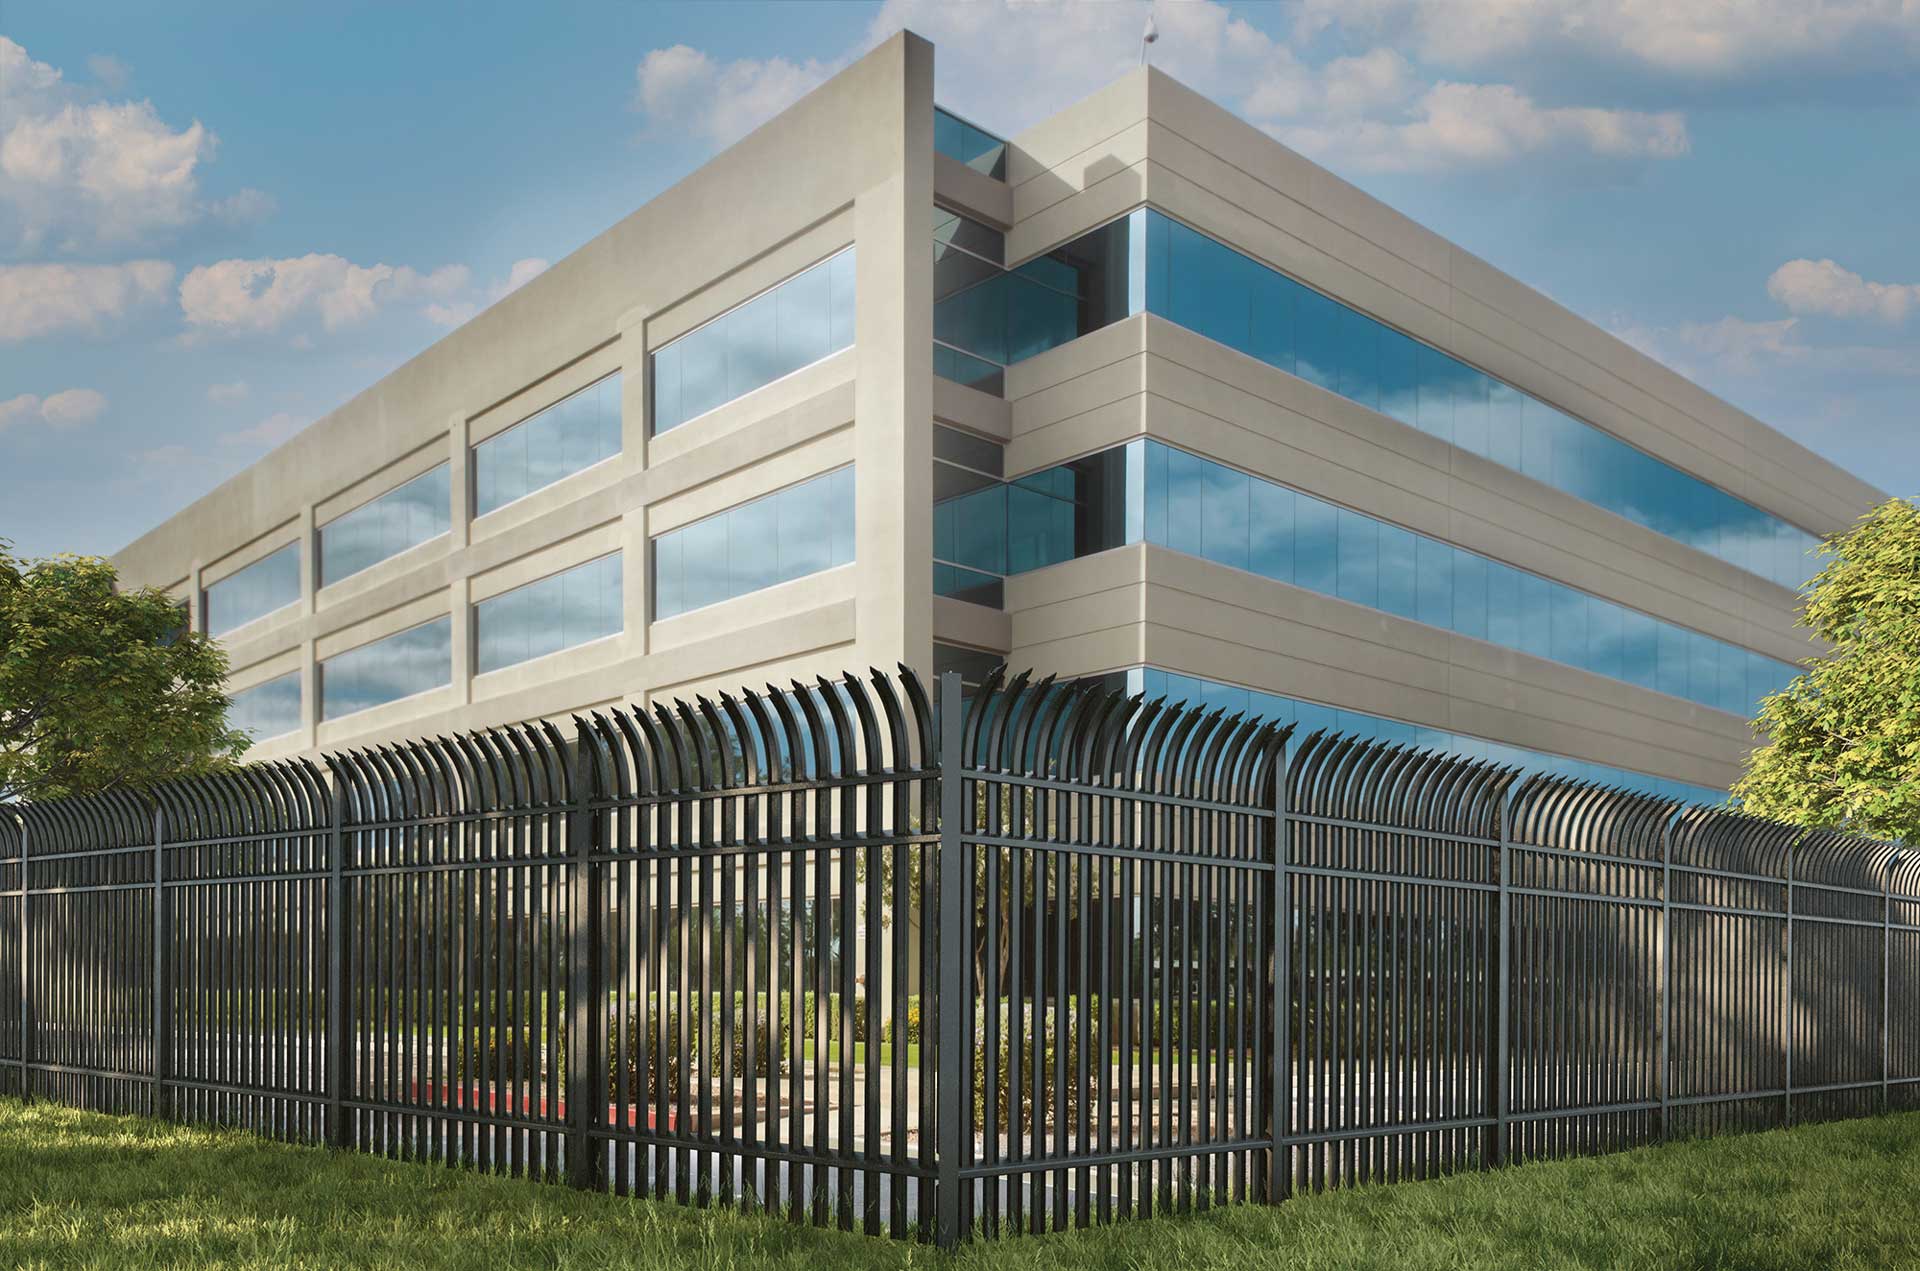 Modern steel high-security fencing surrounding a business office complex, enhancing safety and aesthetics.